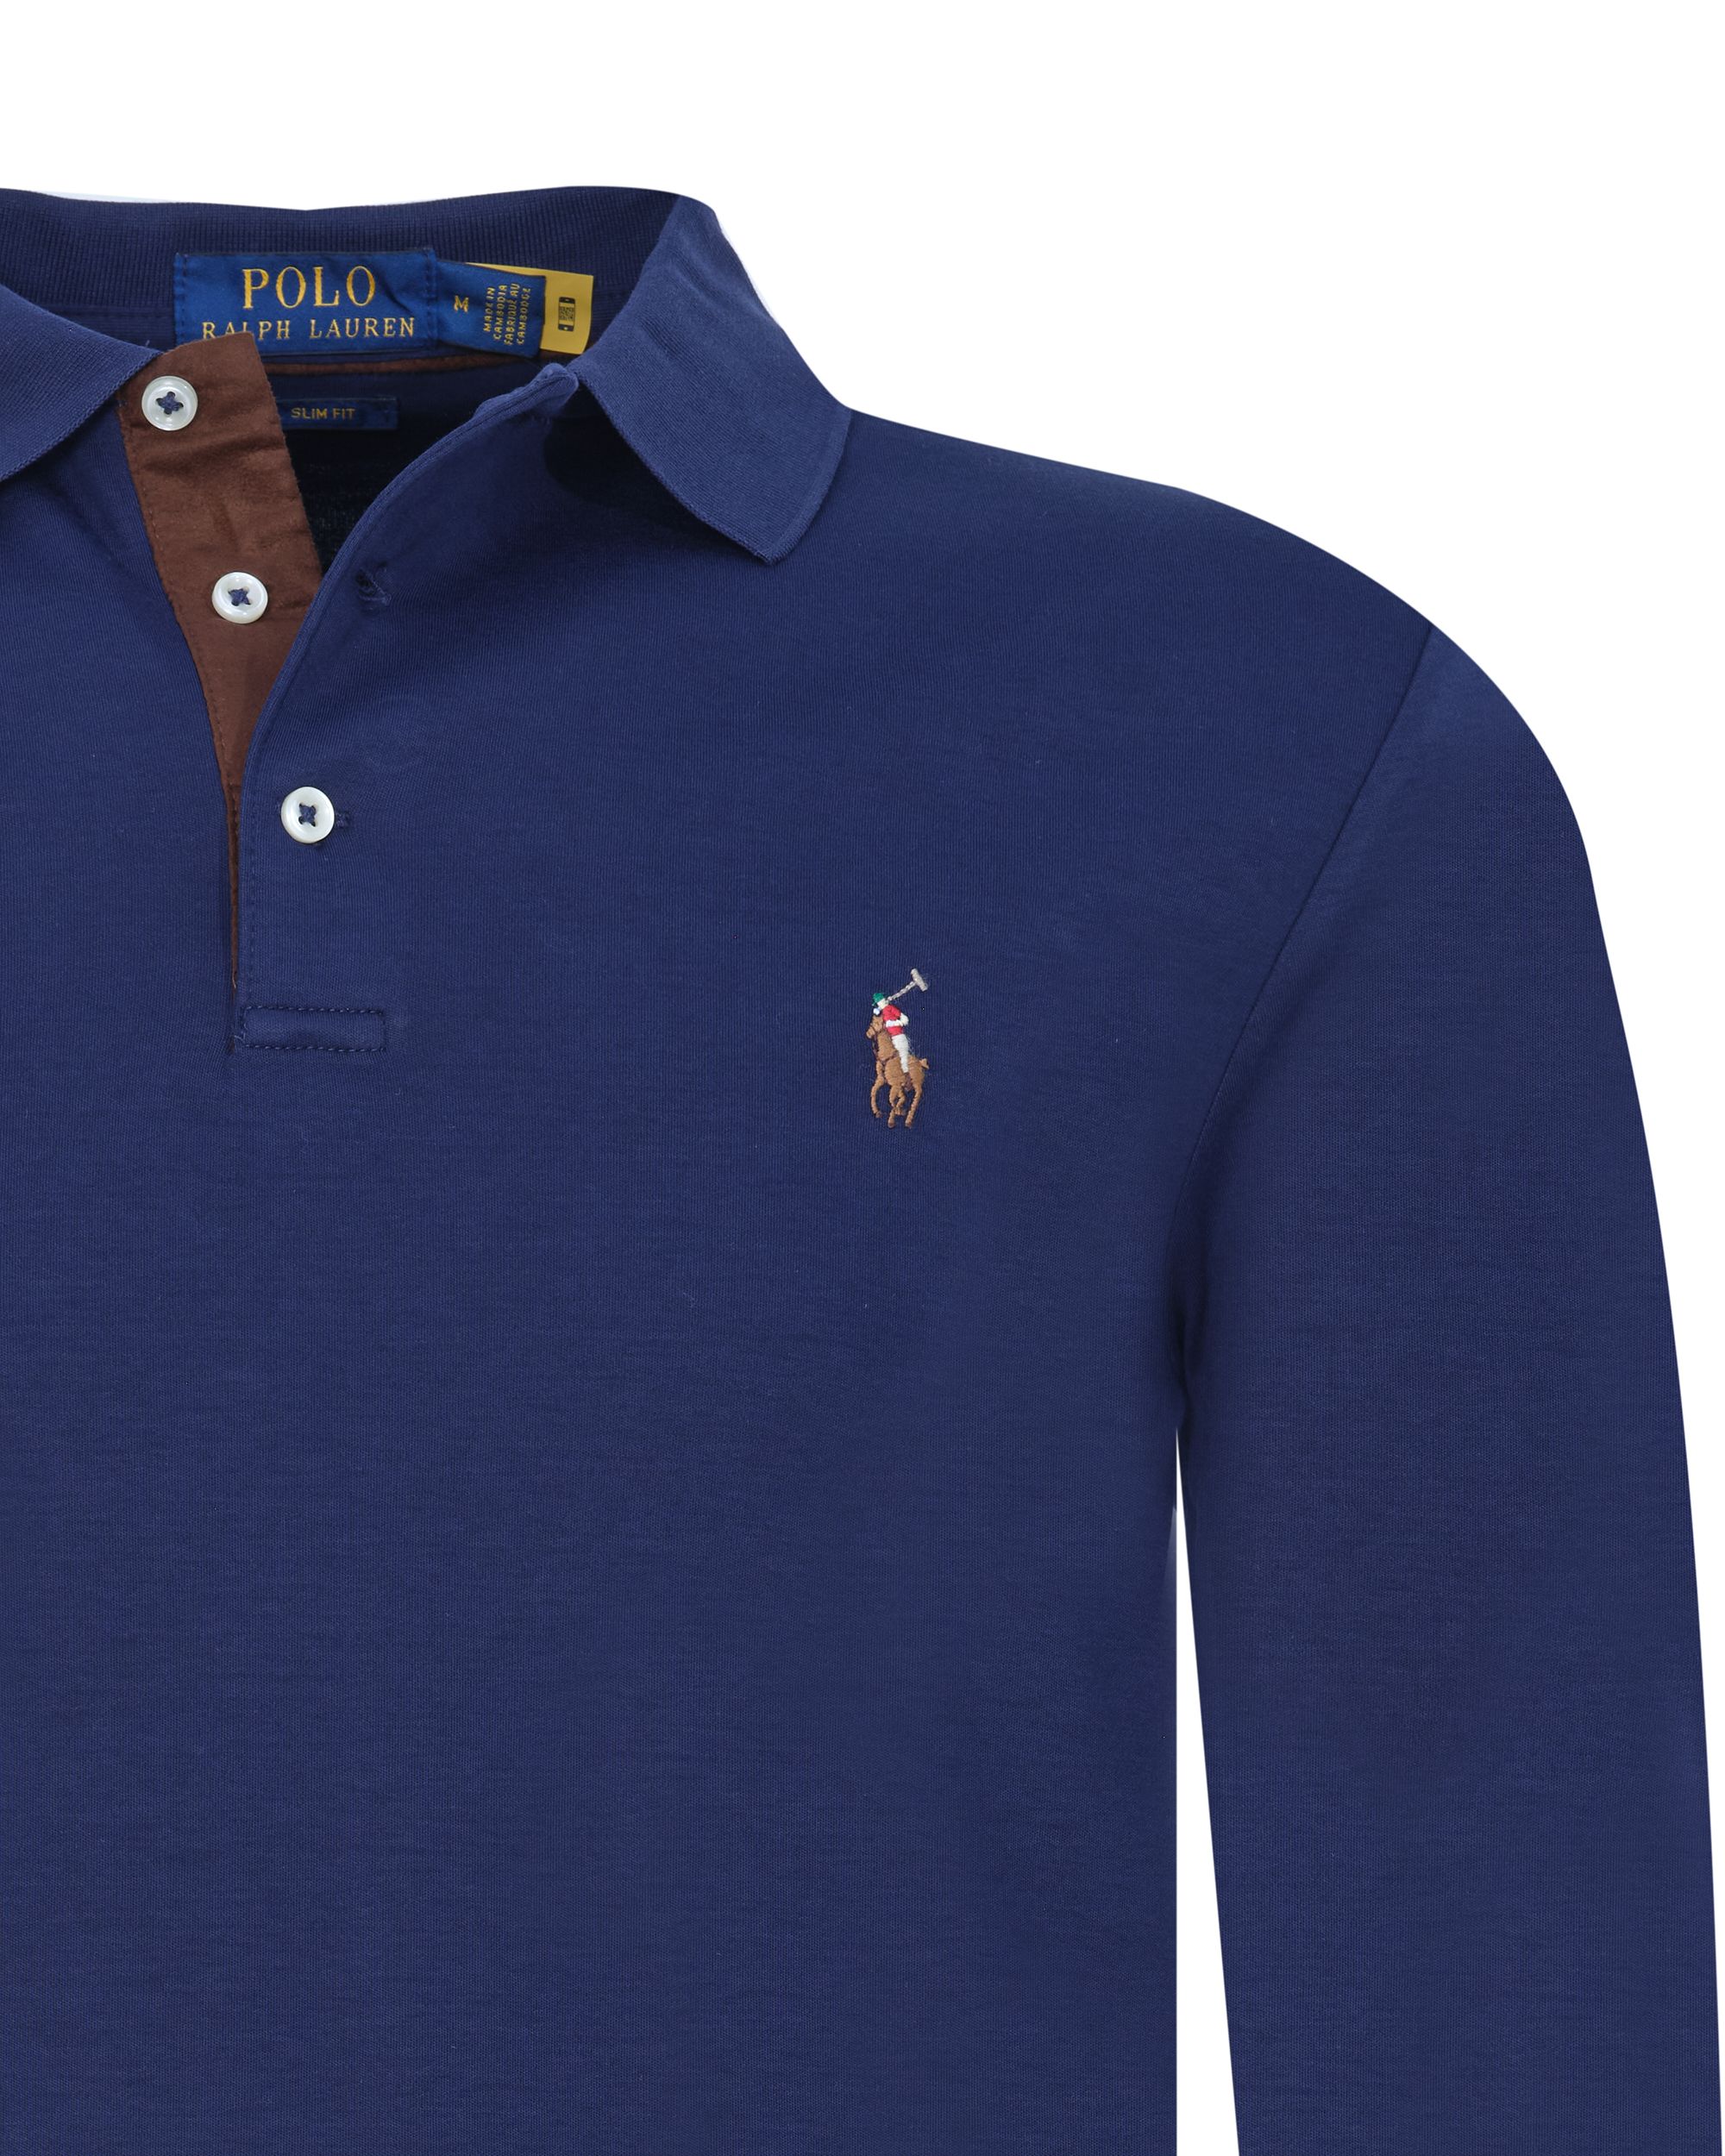 Polo Ralph Lauren Polo LM Donker blauw 080562-001-L